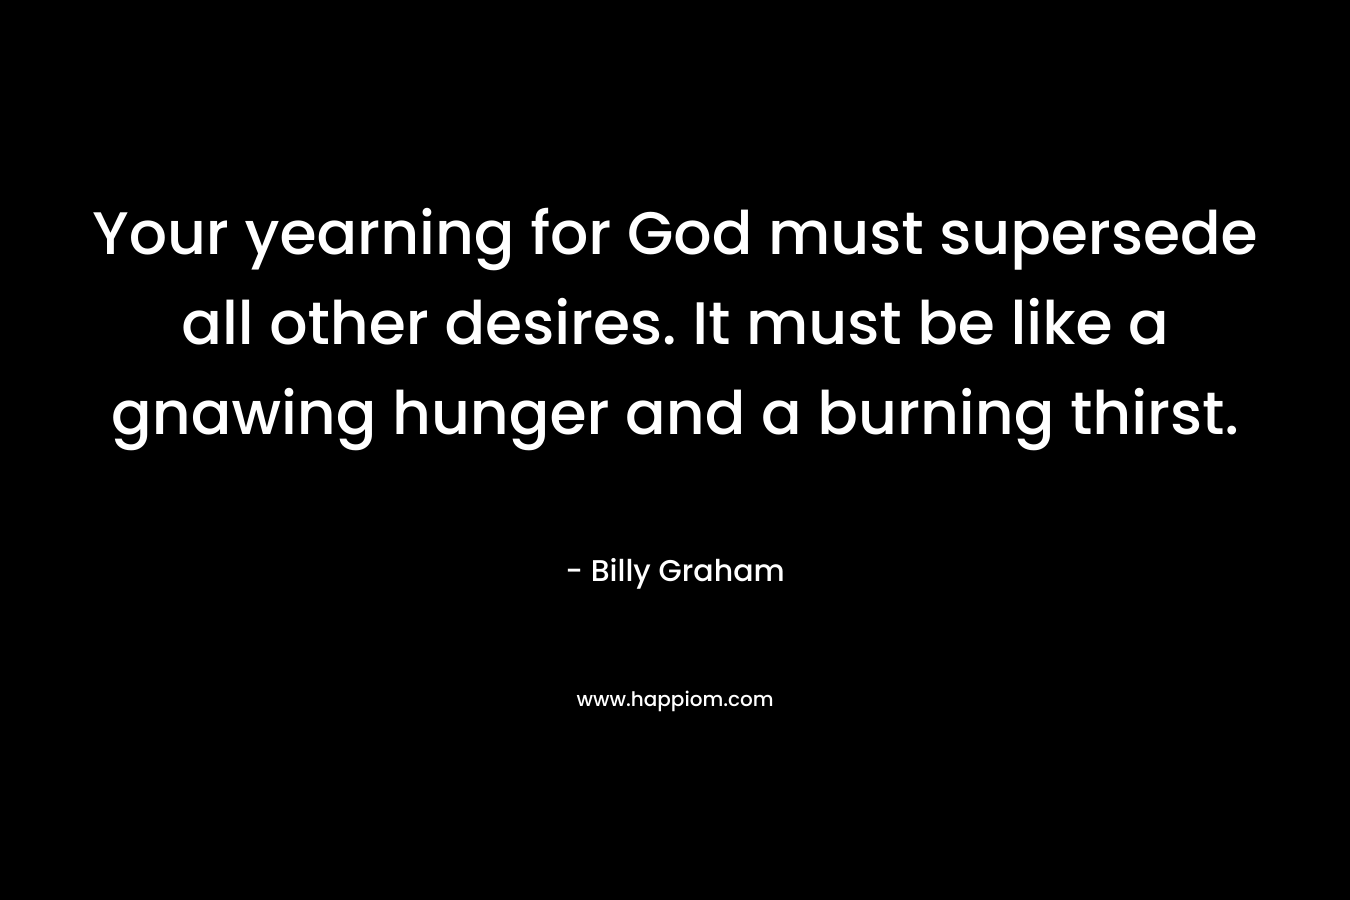 Your yearning for God must supersede all other desires. It must be like a gnawing hunger and a burning thirst.